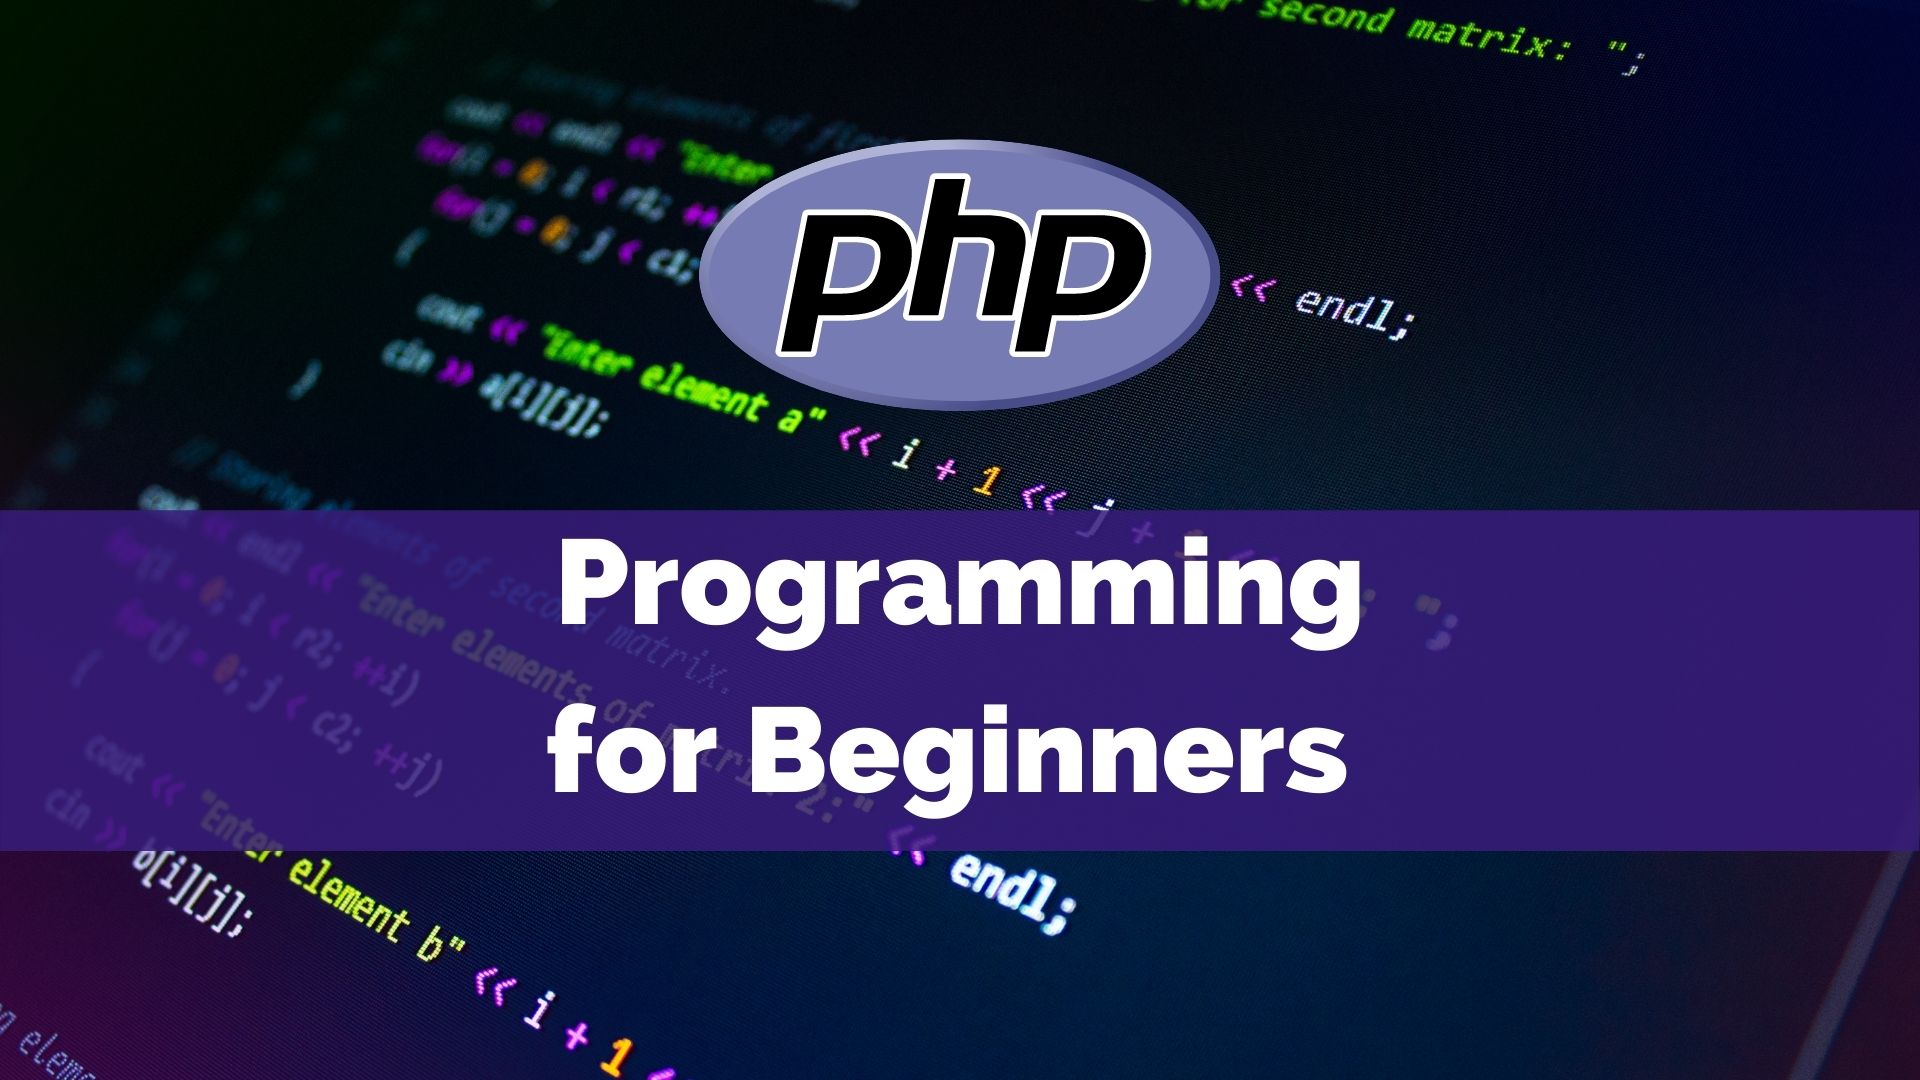 PHP Programming for Beginners Course Image GoEdu